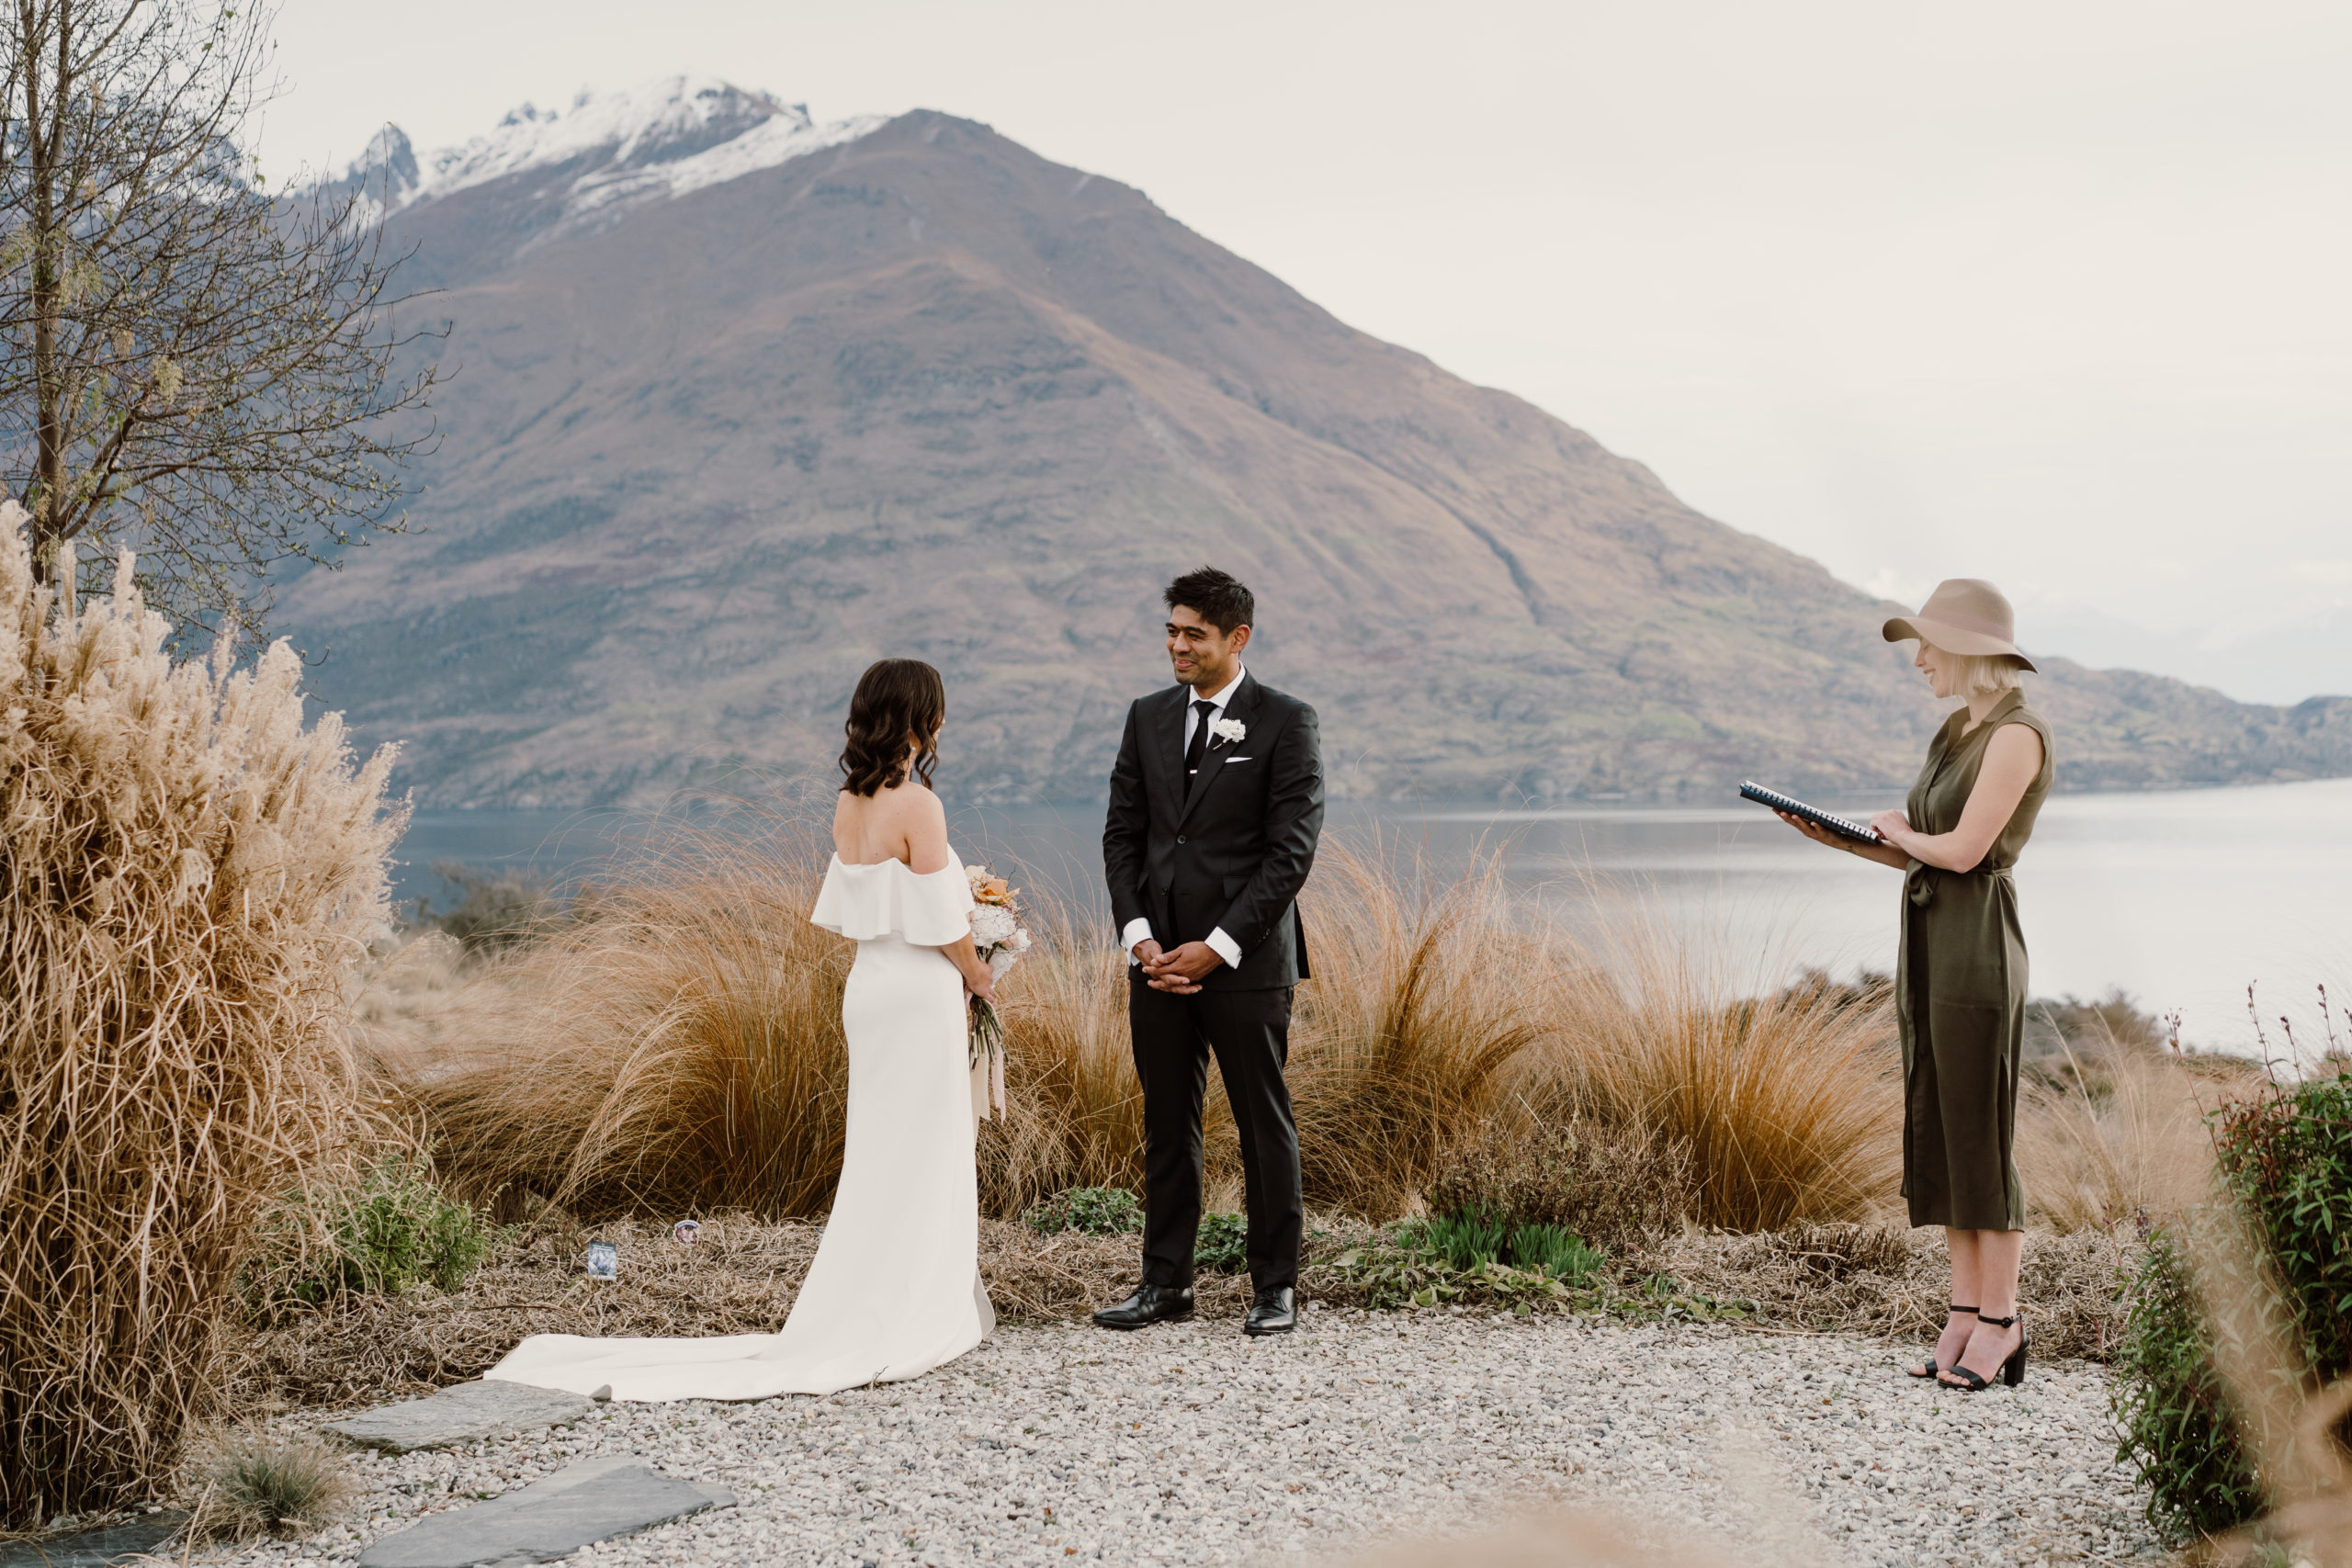 Wedding ceremony with marriage celebrant at Jack's Retreat in Queenstown, New Zealand